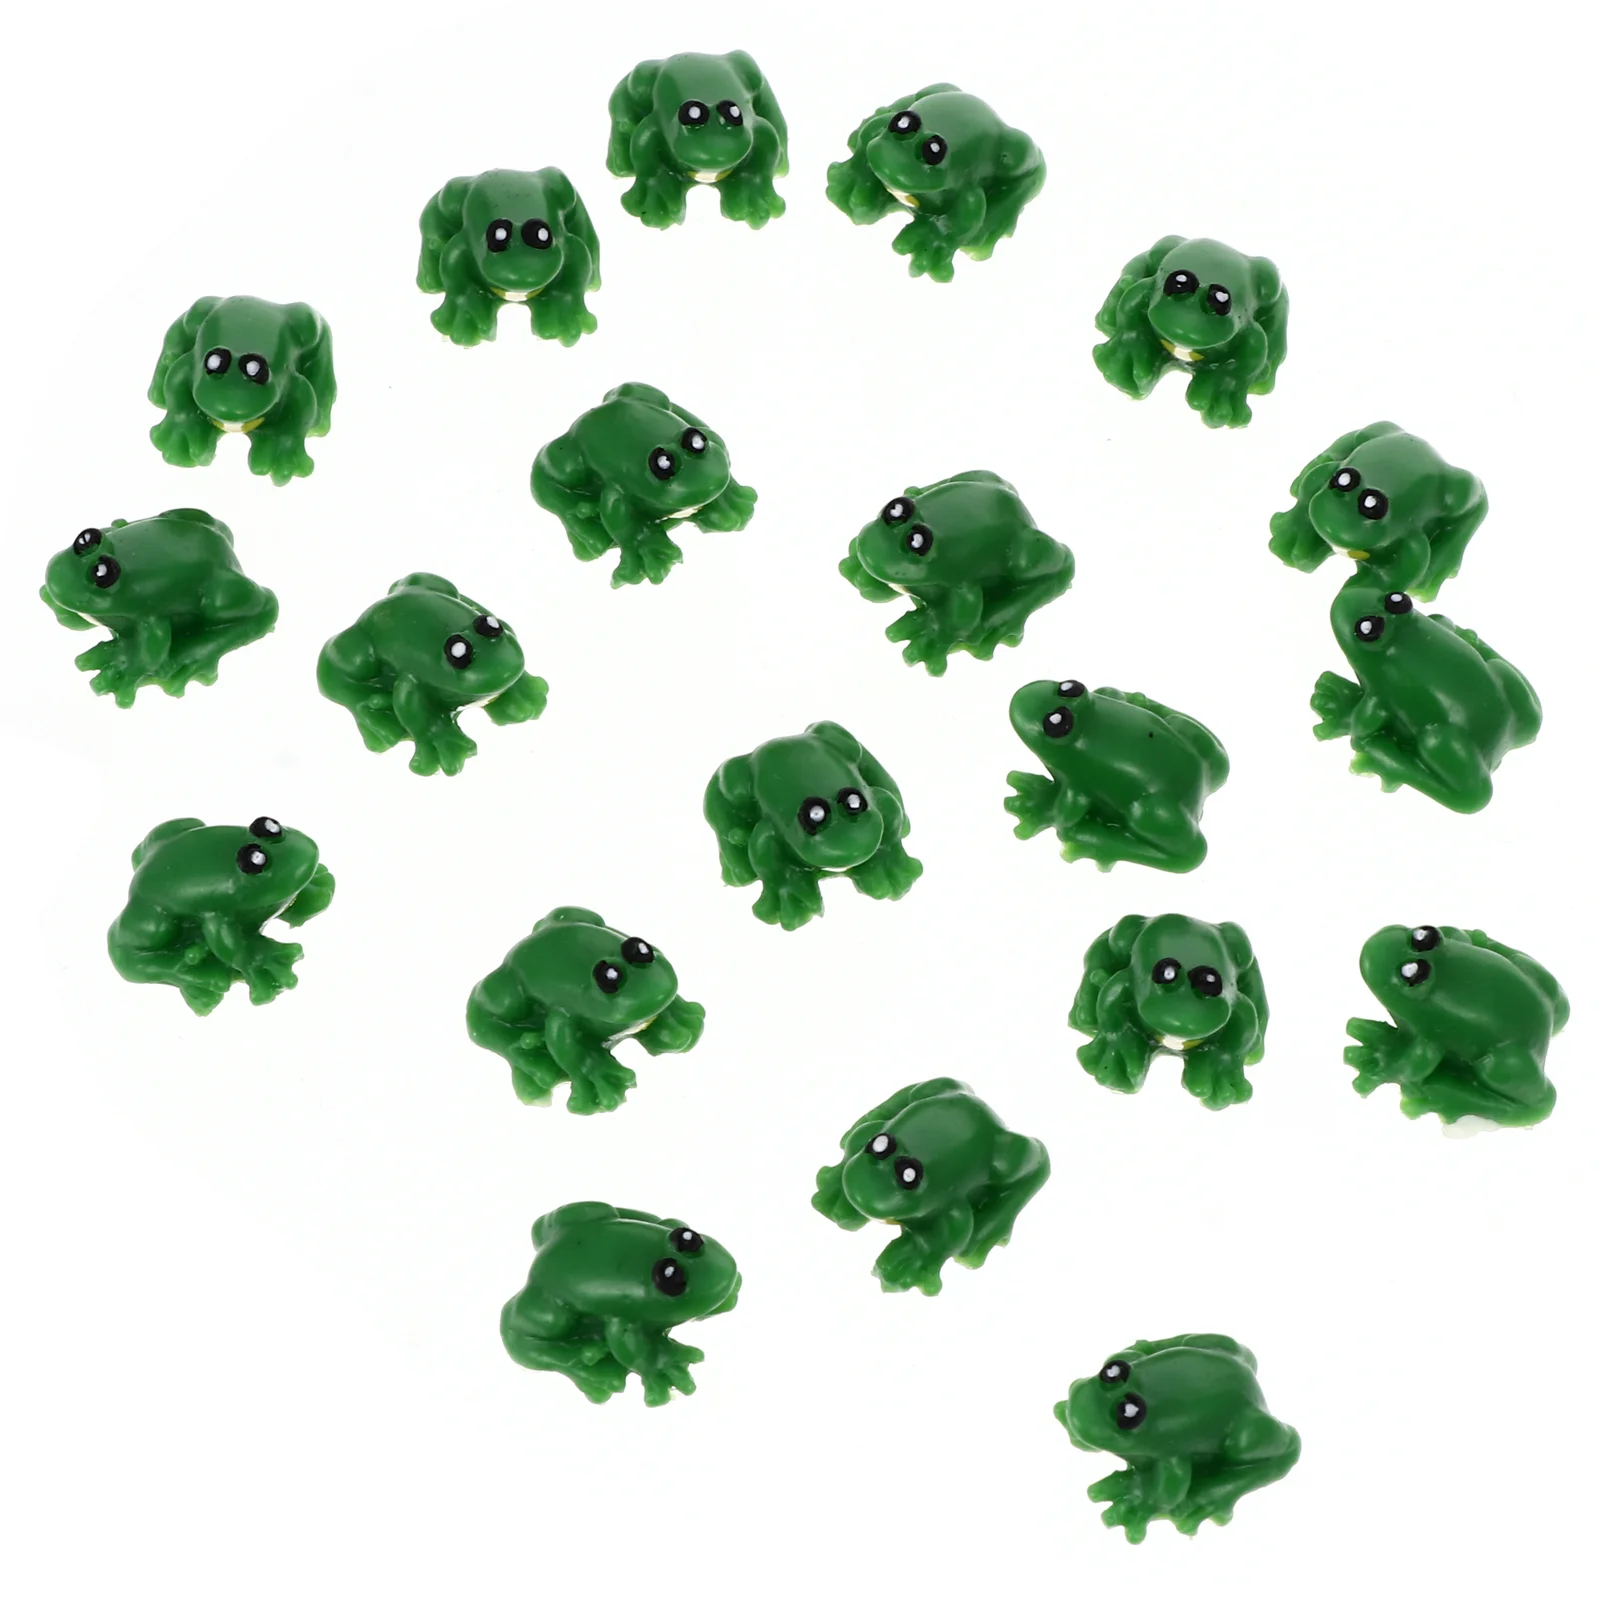 

20 Pcs Resin Frog Outdoor Playset Frogs Suite Landscape Adornment Decor Micro Ornament Crafts Statue